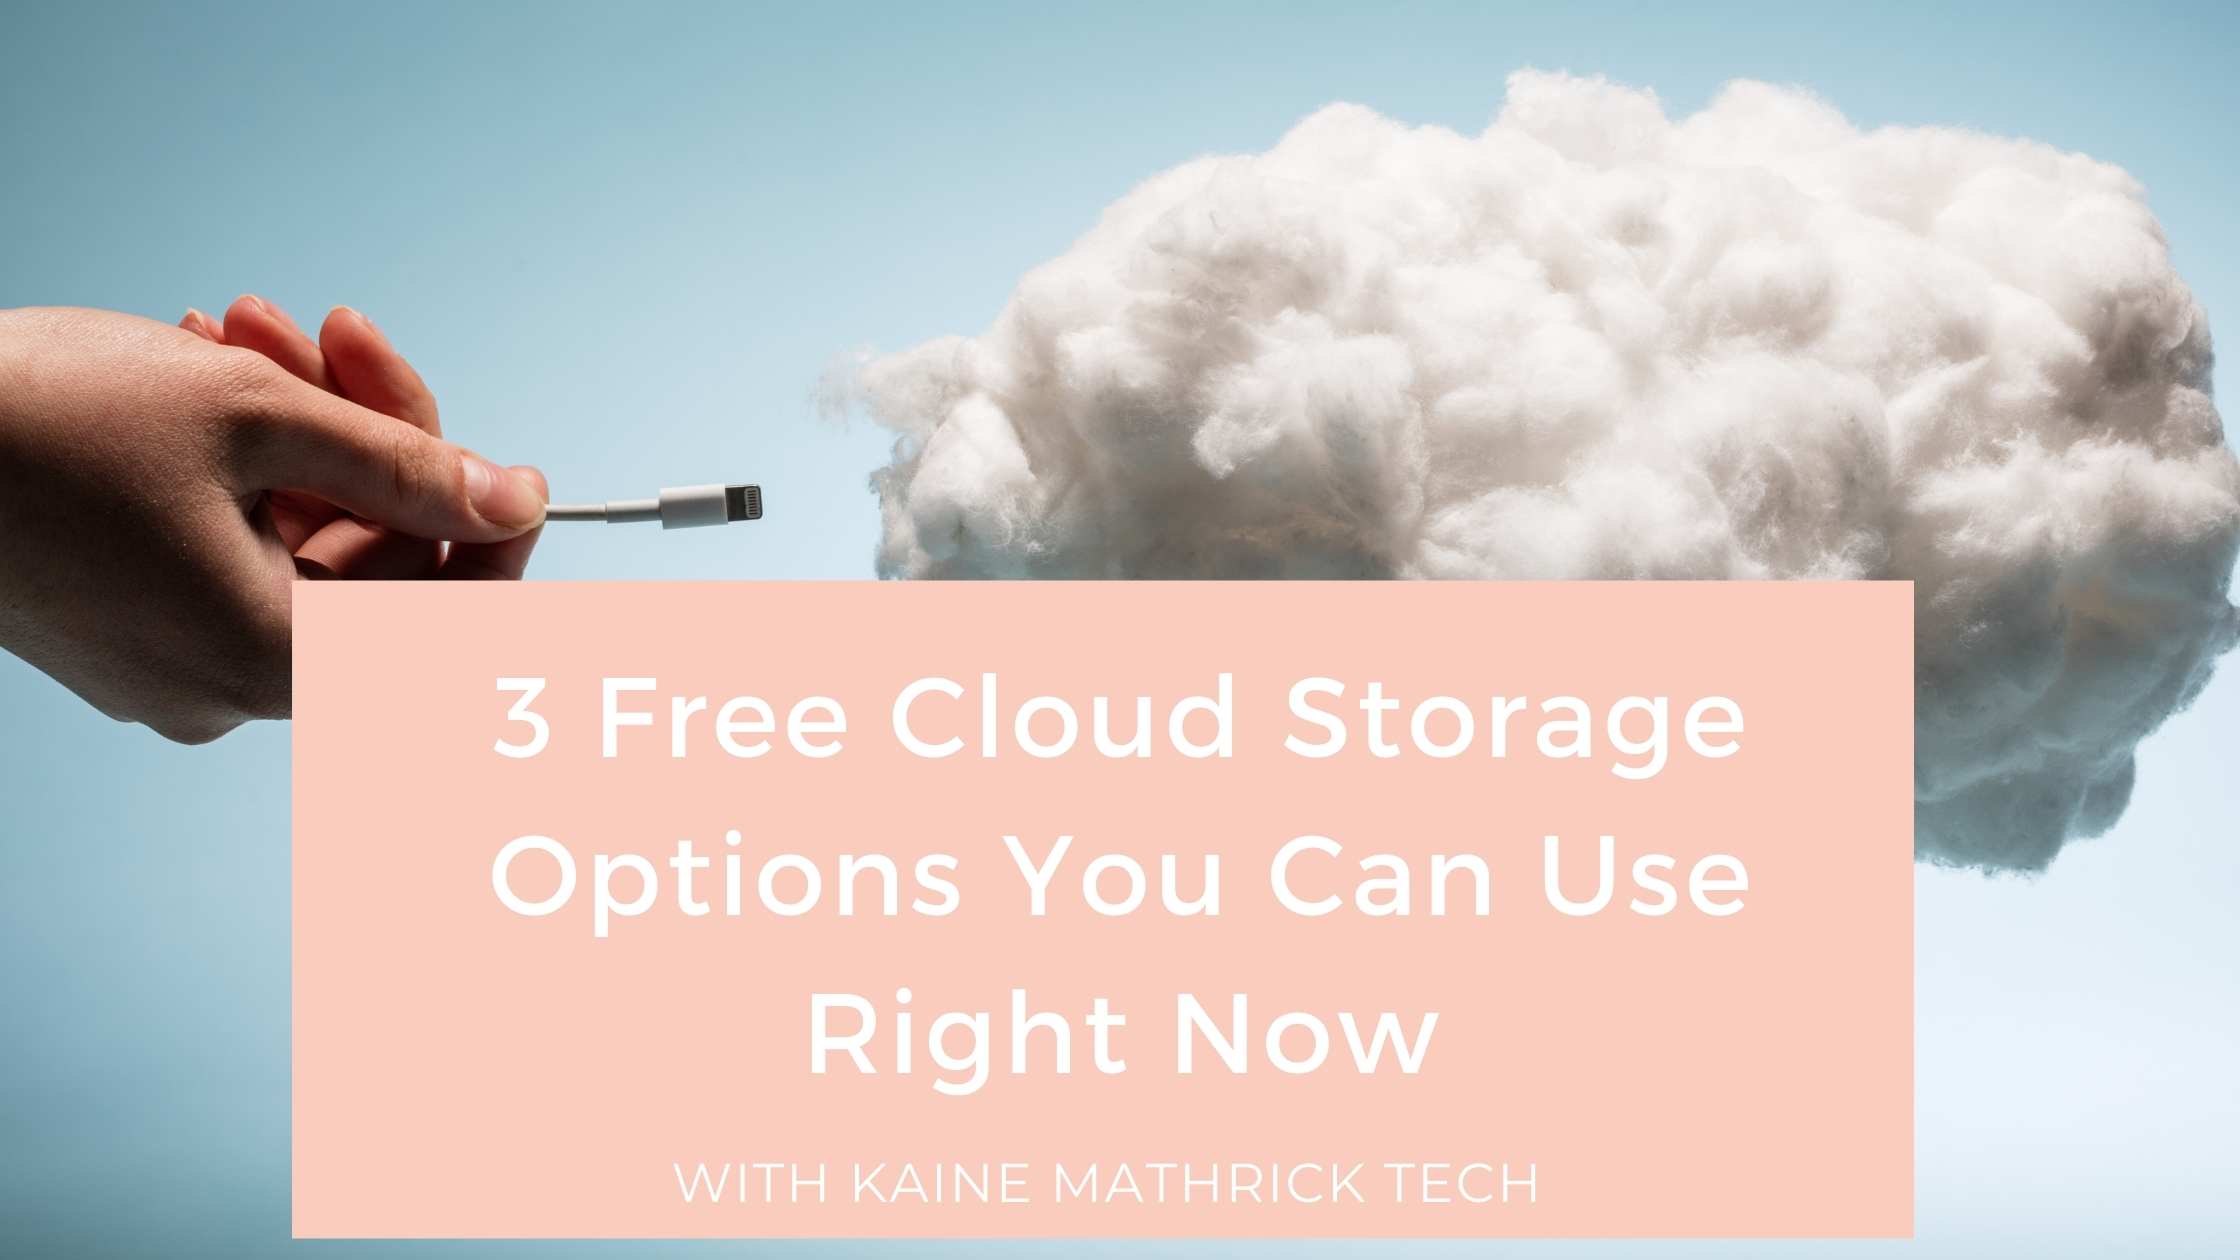 3 Free Cloud Storage Options You Can Use Right Now